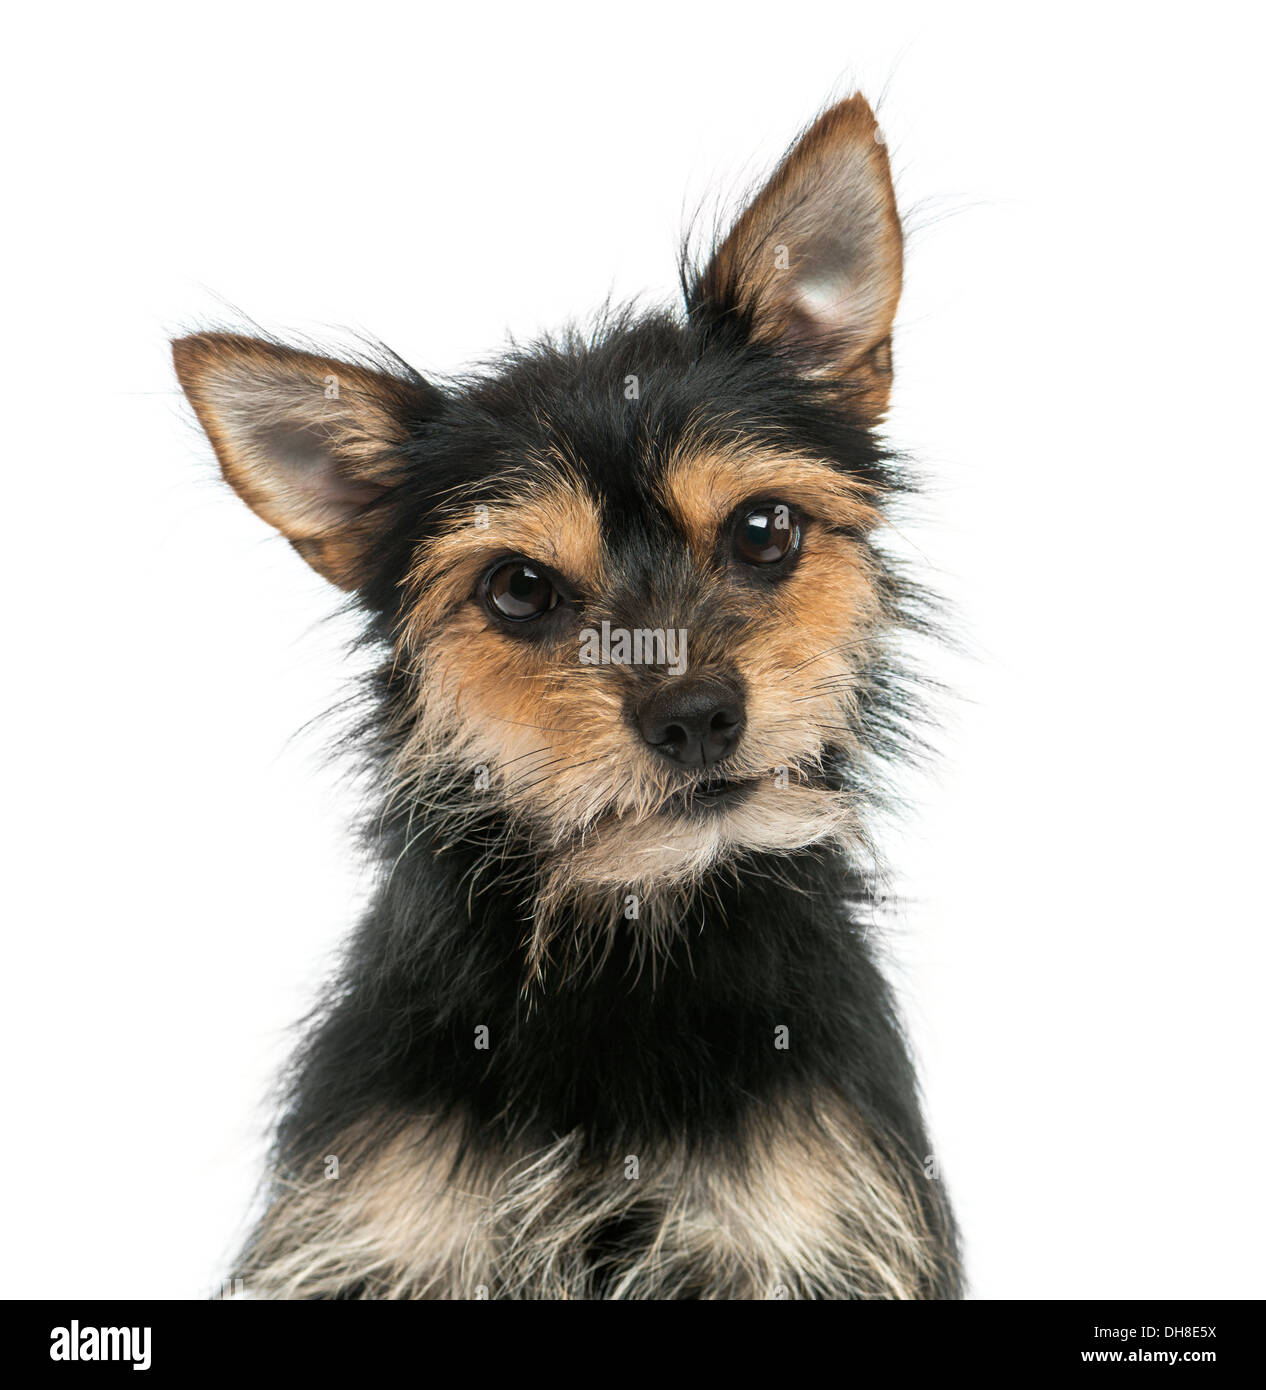 Close-up of a mixed-breed dog looking at the camera against white background Stock Photo